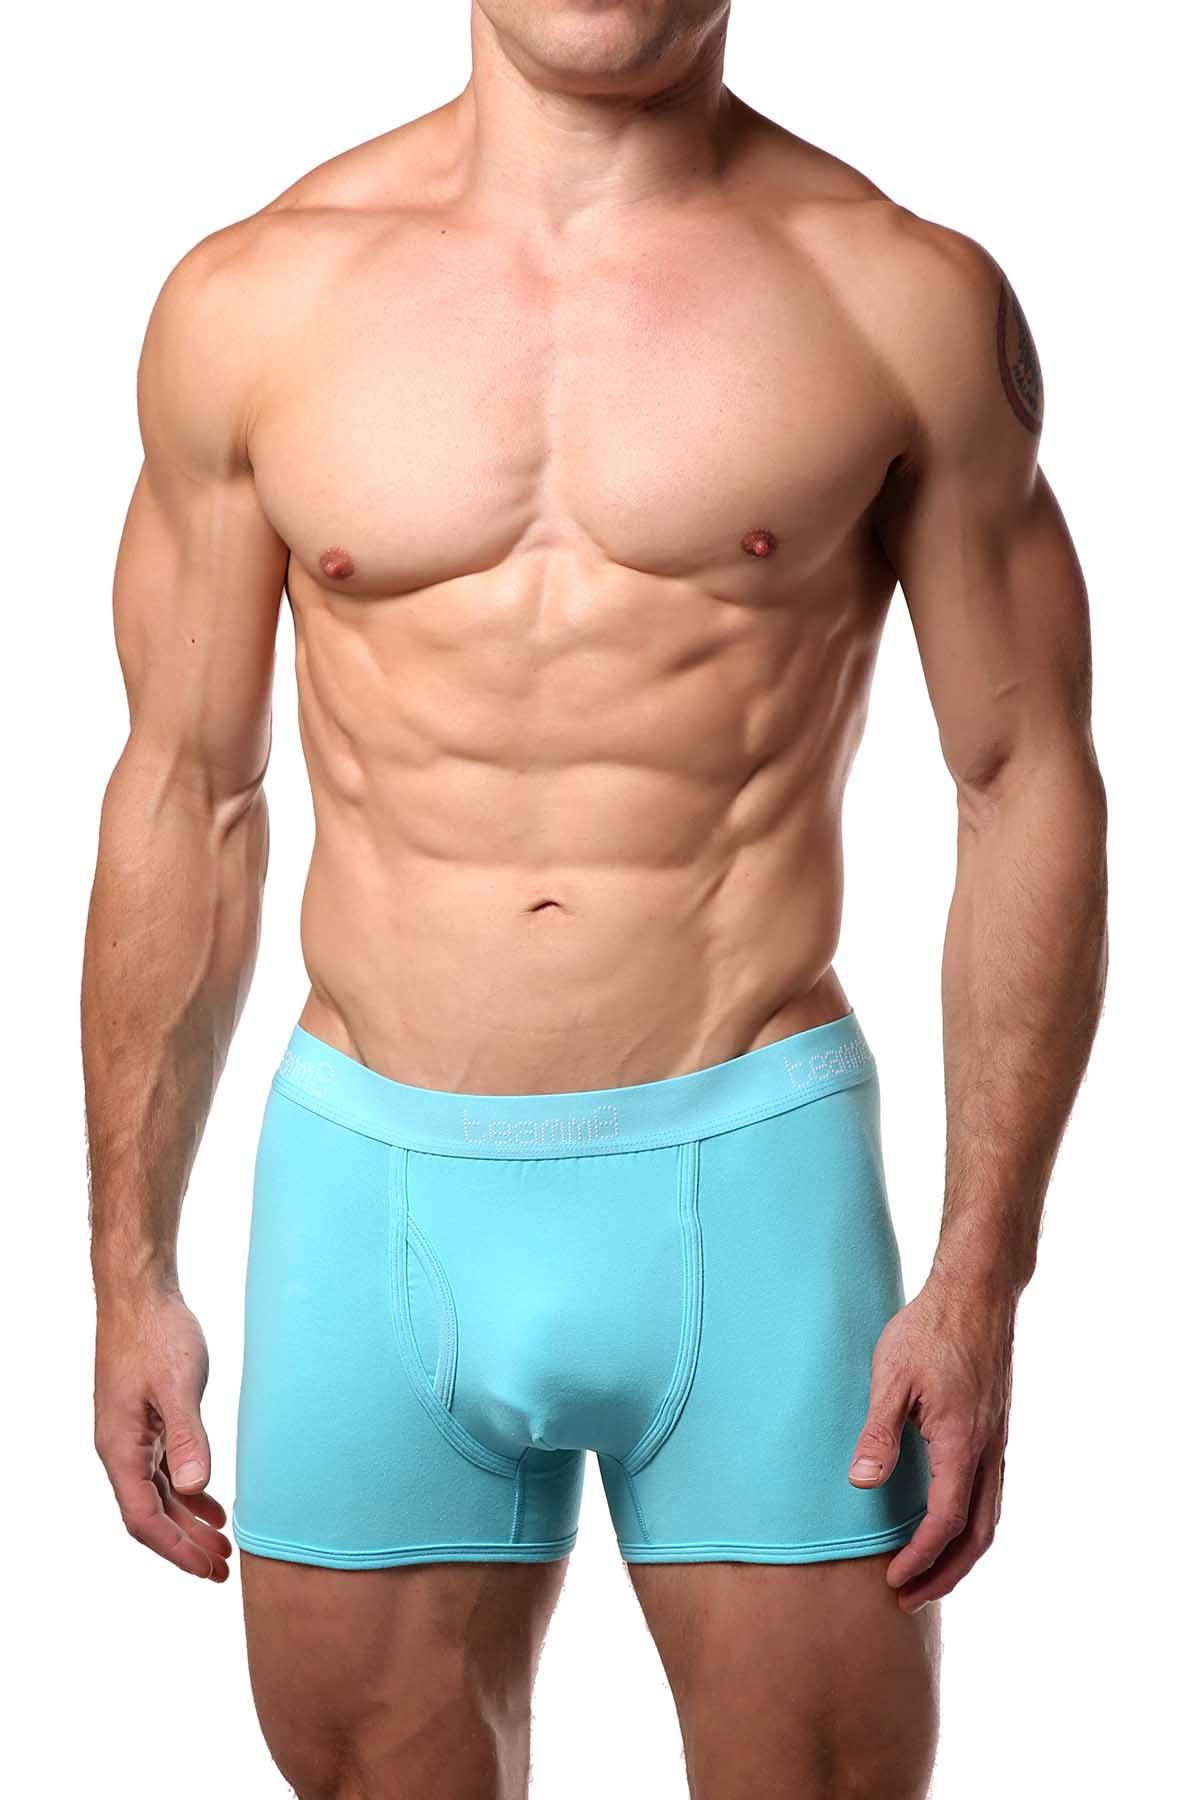 Teamm8 Blue-Radiance Classic Trunk